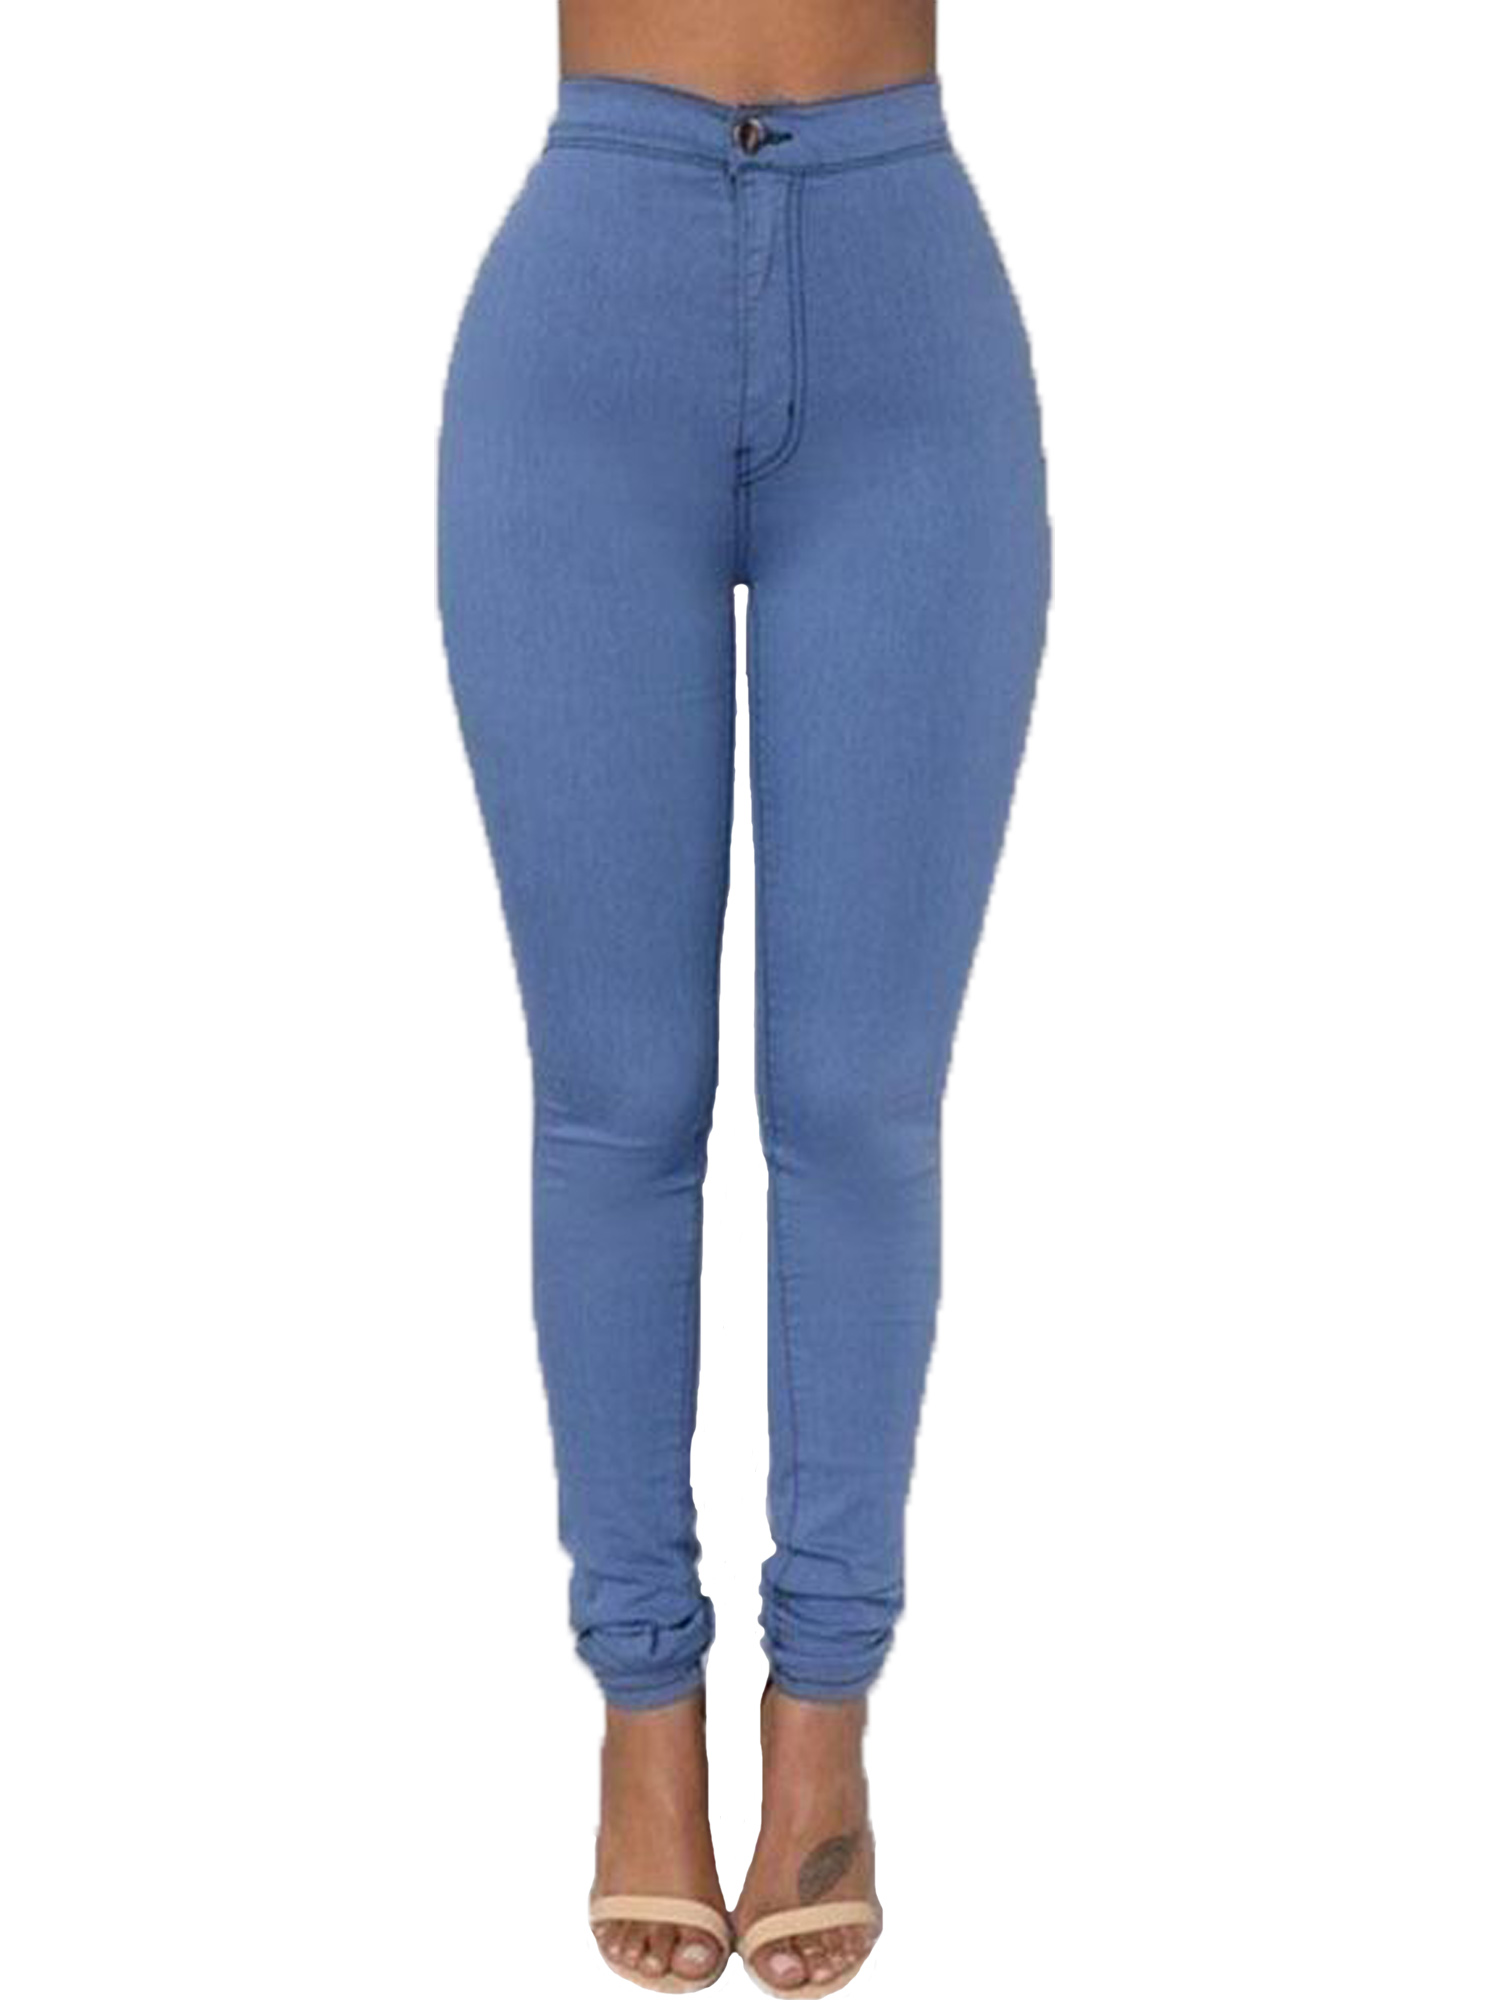 Emmababy Pencil Jeans Women Stretch Casual Denim Skinny Pants Lady High Waist Trousers - image 3 of 5